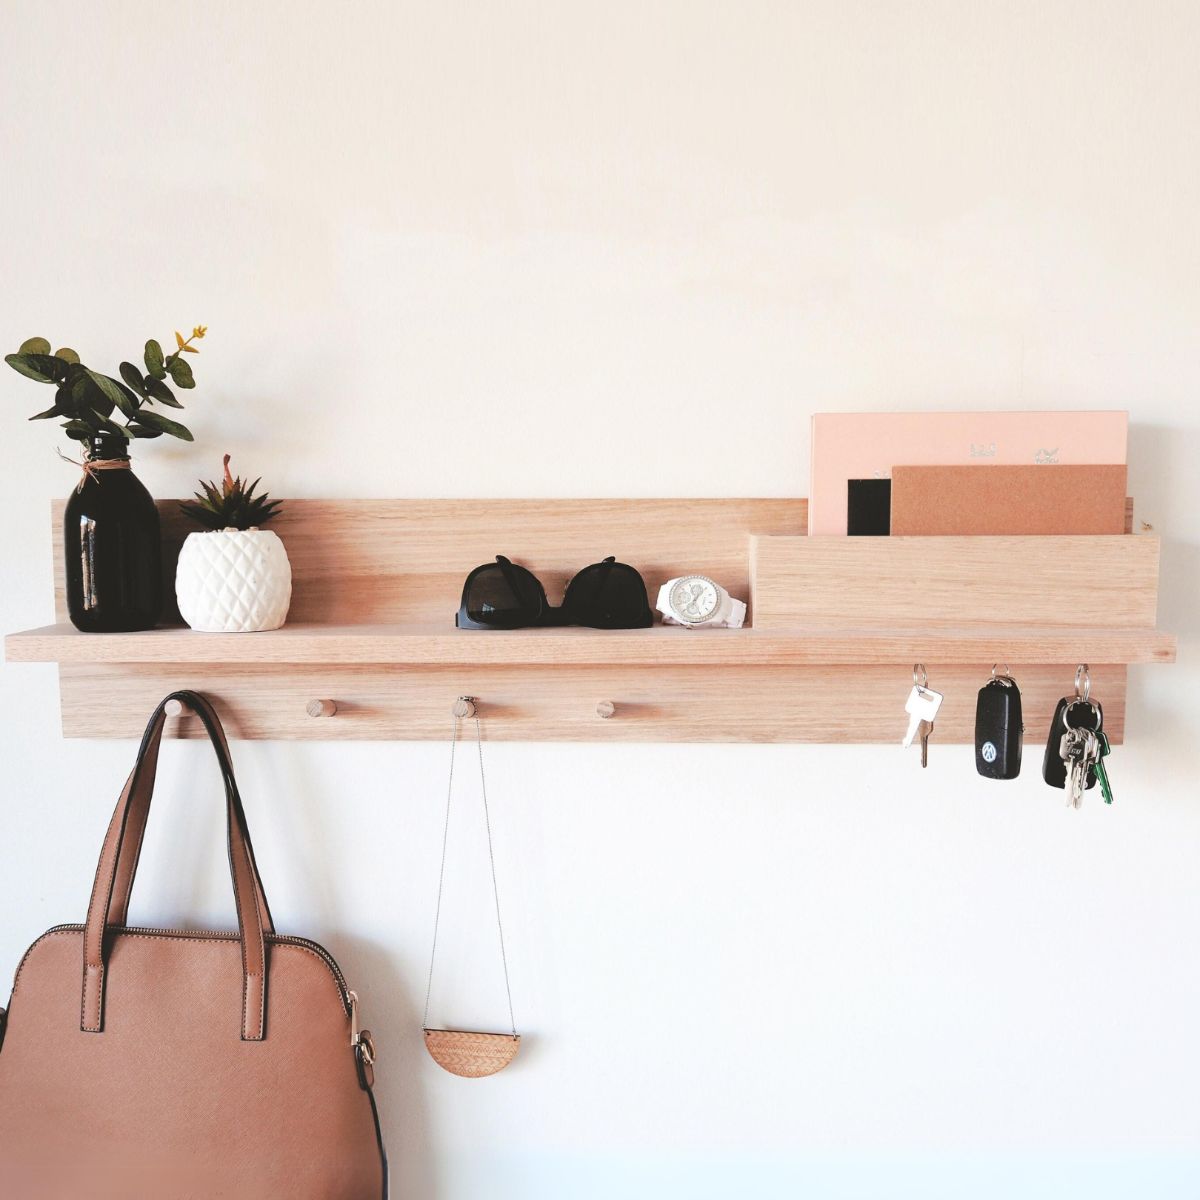 This is an 80cm Tasmanian Oak Entryway Shelf Organiser. Wall-mounted with mail holder, magnetic key holders, coat rack and shelf.